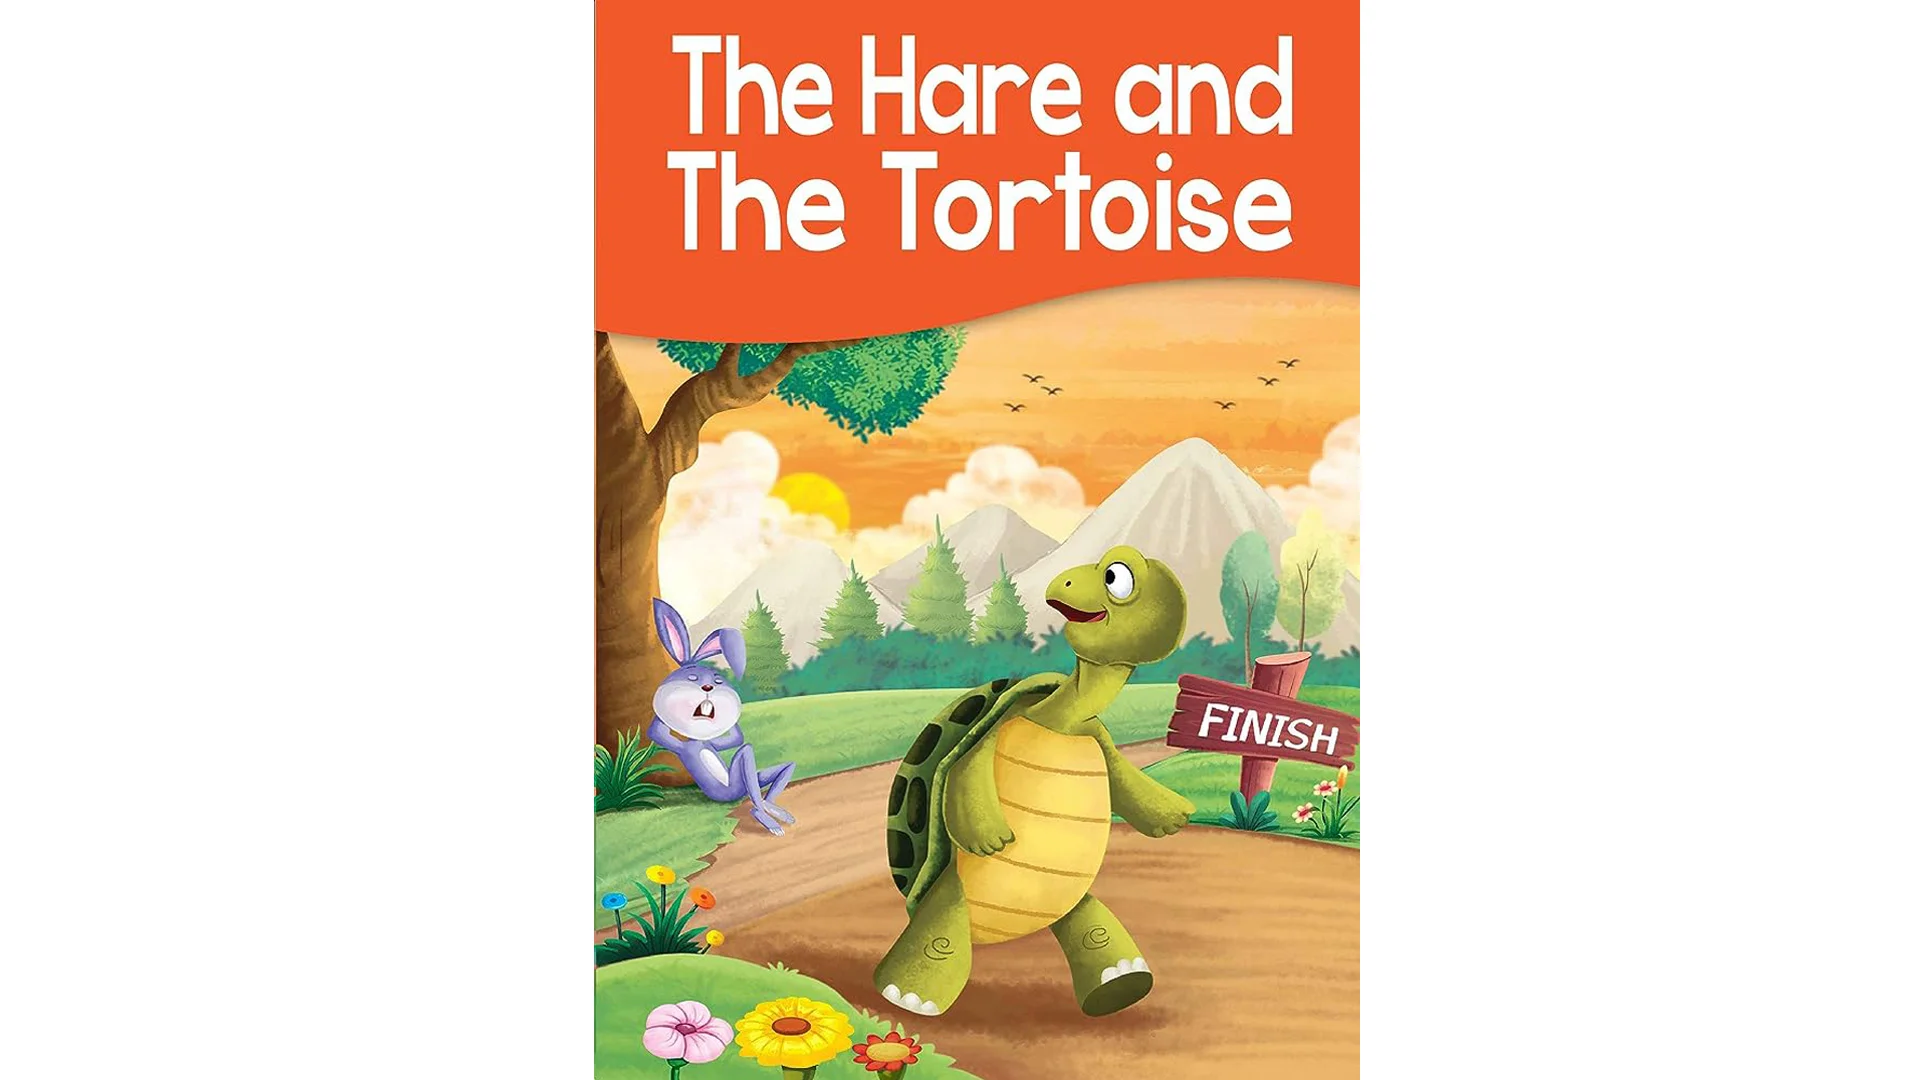 The tortoise and the Hare